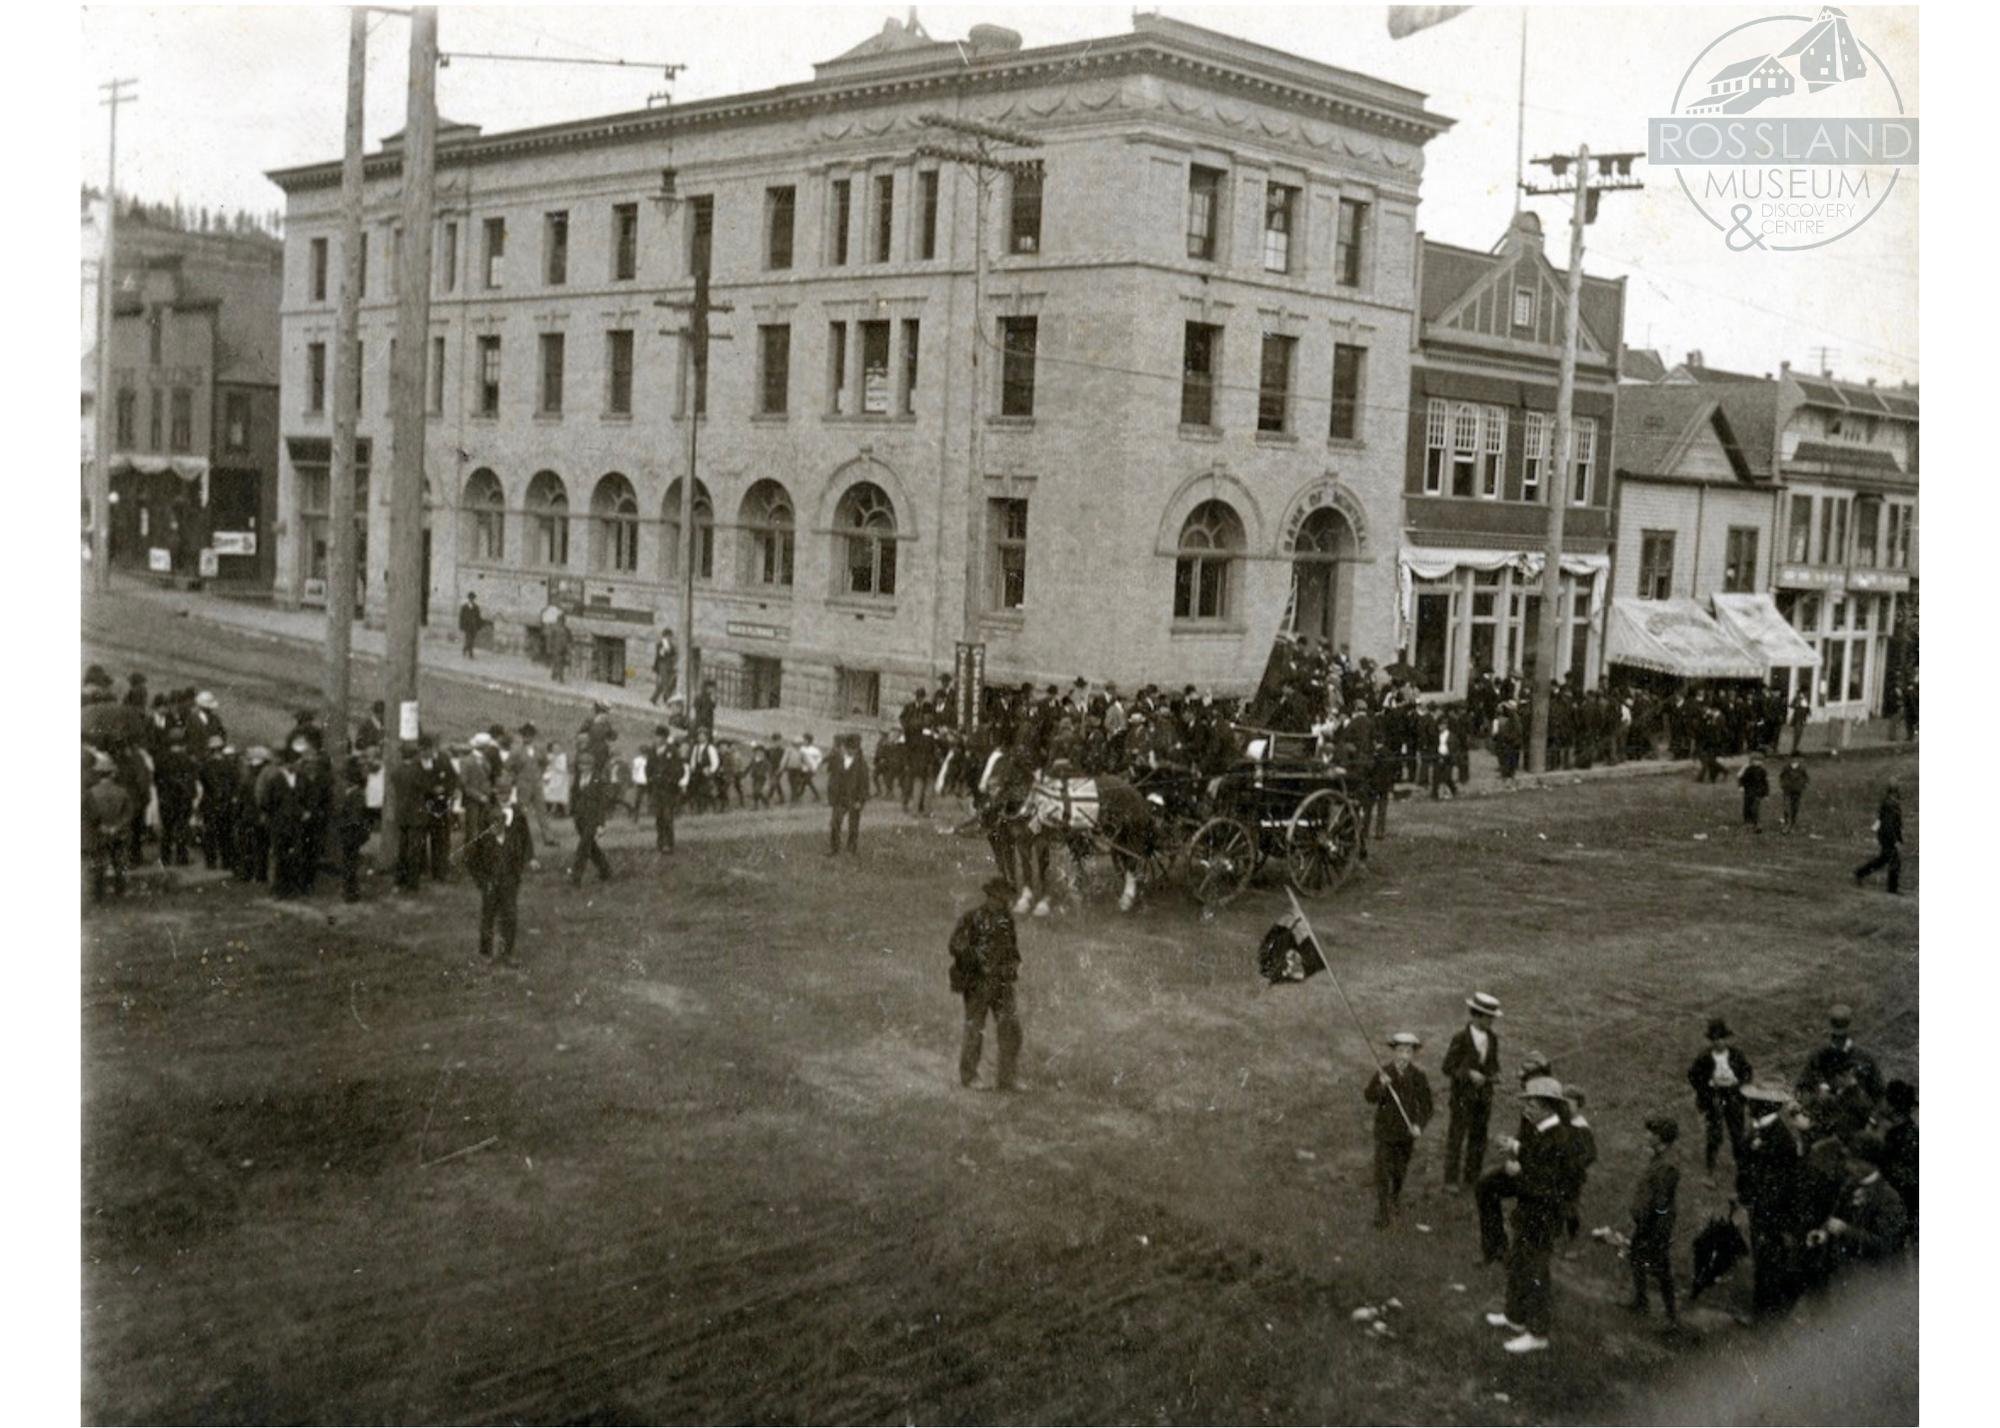   2282.0004 : Bank of Montreal in Rossland, 1900. 